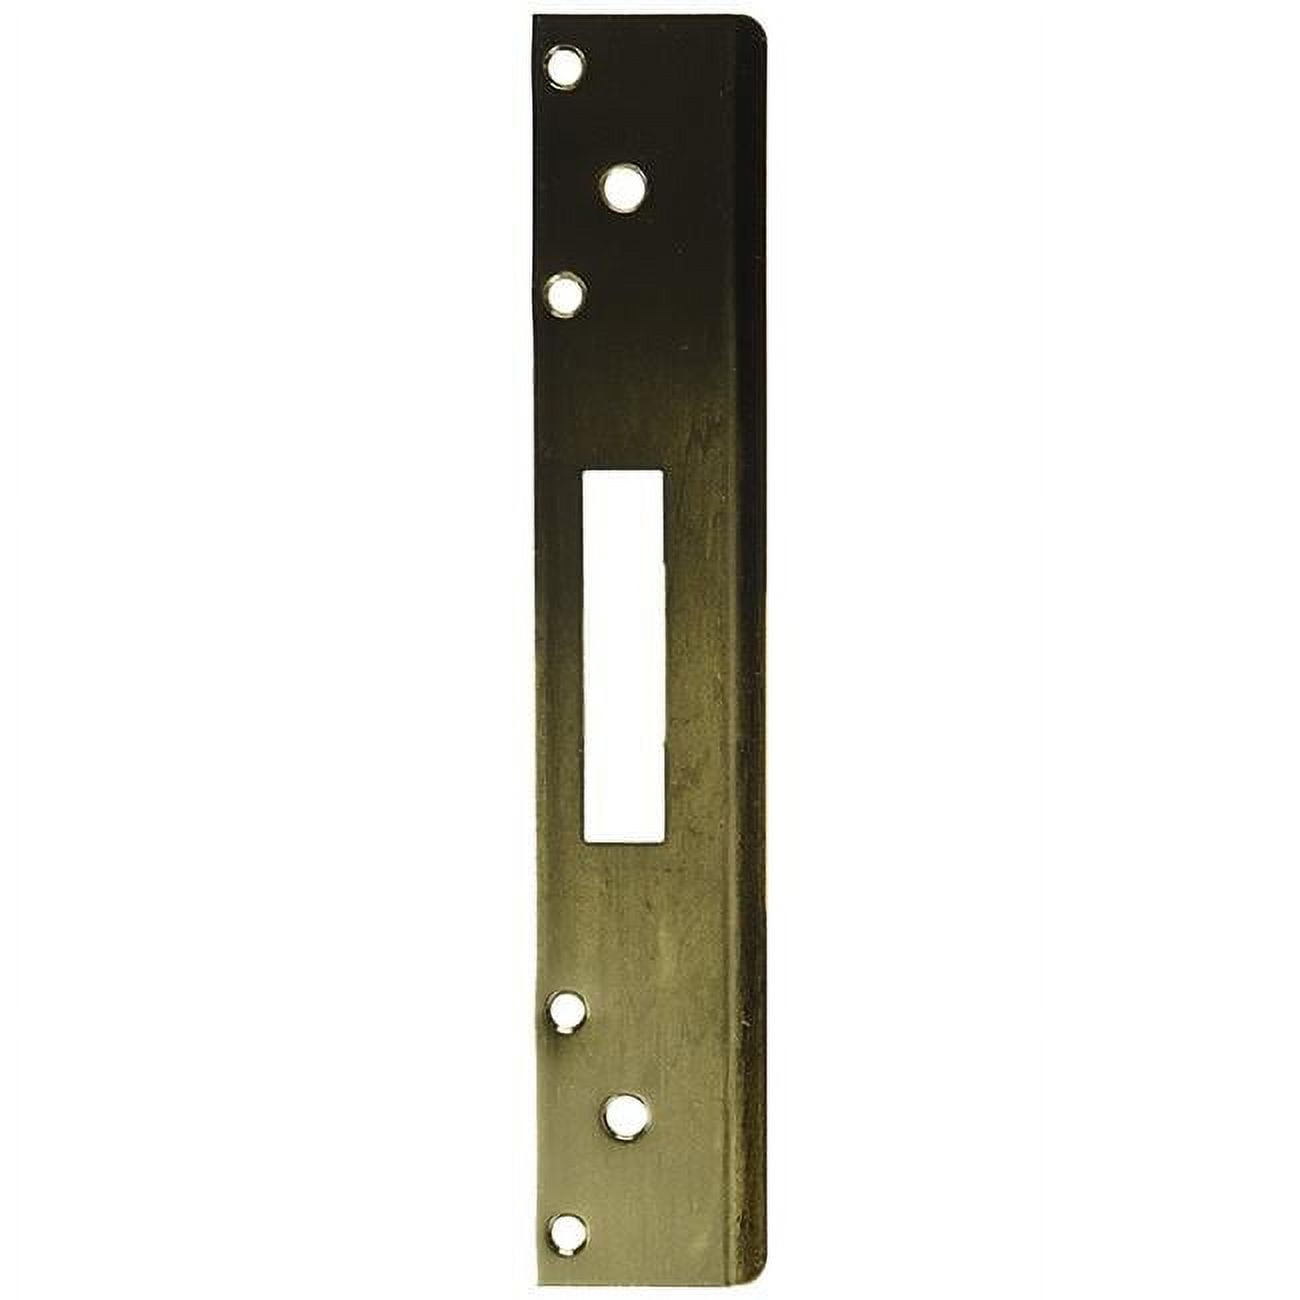 Fl 212w4-wh 12 In. Full Lip High Security Strike With 4 In. Ctc Latch Holes, White Coated